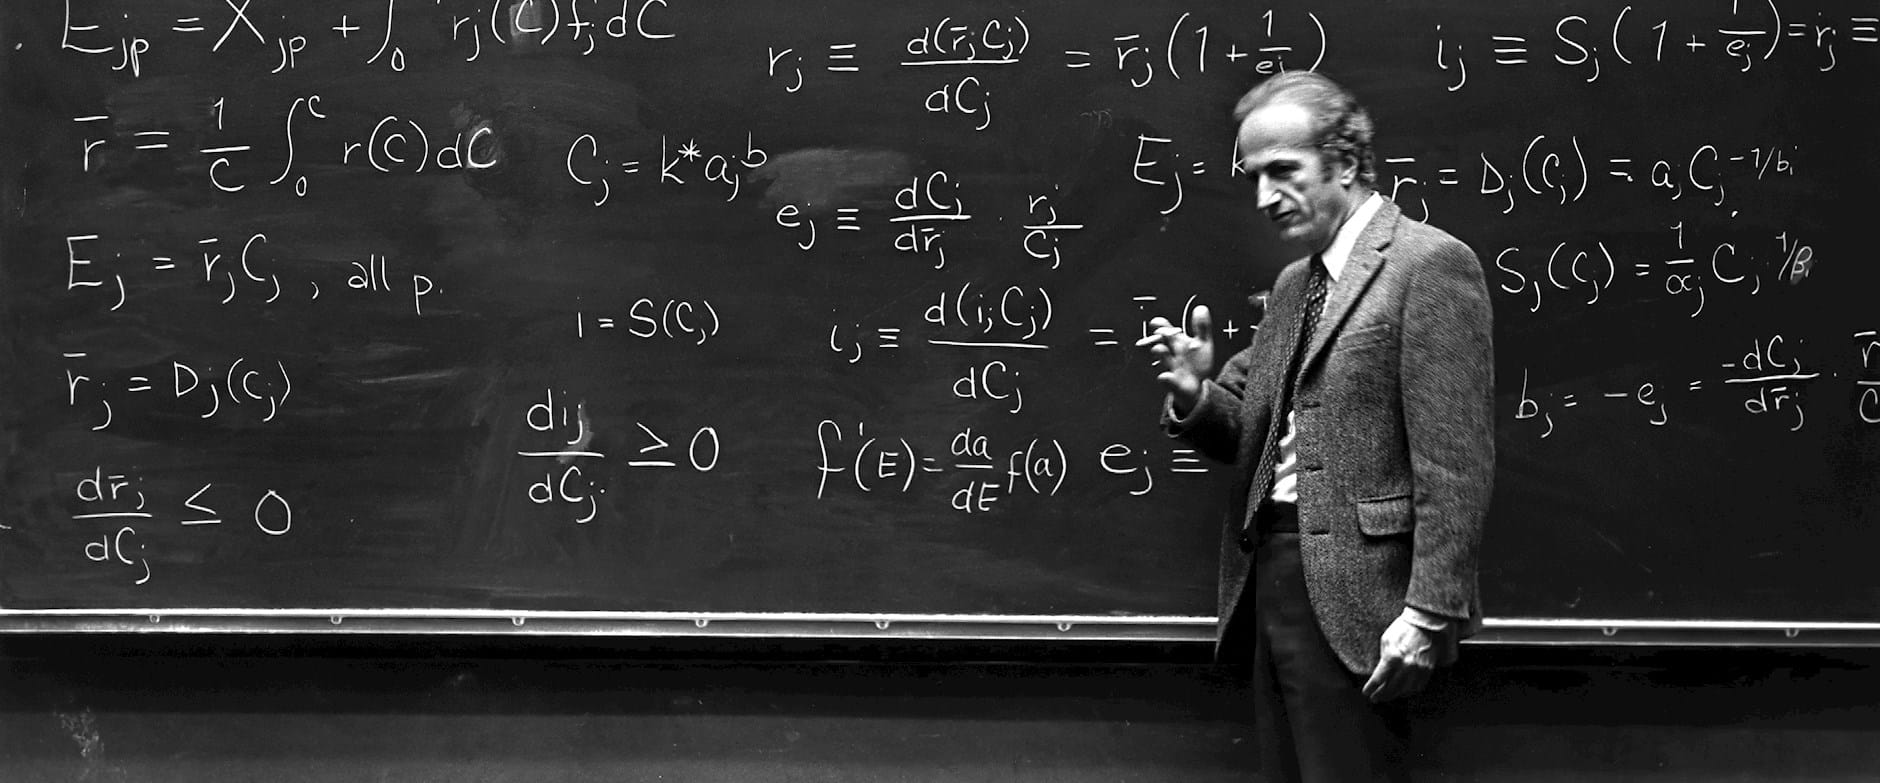 Gary Becker teaching in front of a large chalkboard covered in equations